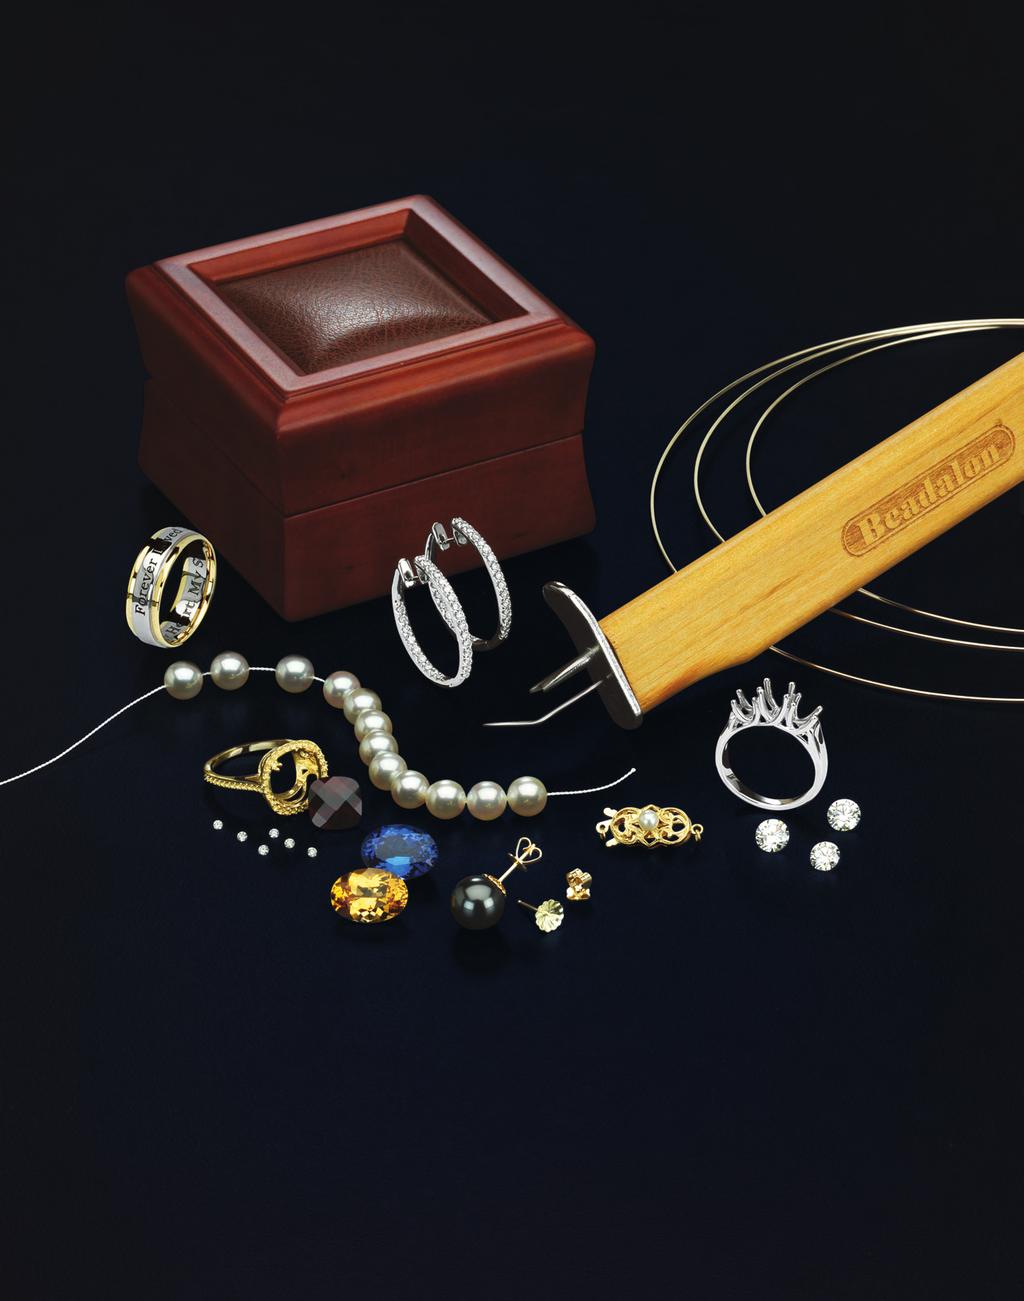 Where Possibilities Never End Our inventory of mountings, findings, diamonds and gemstones offer you endless possibilites.